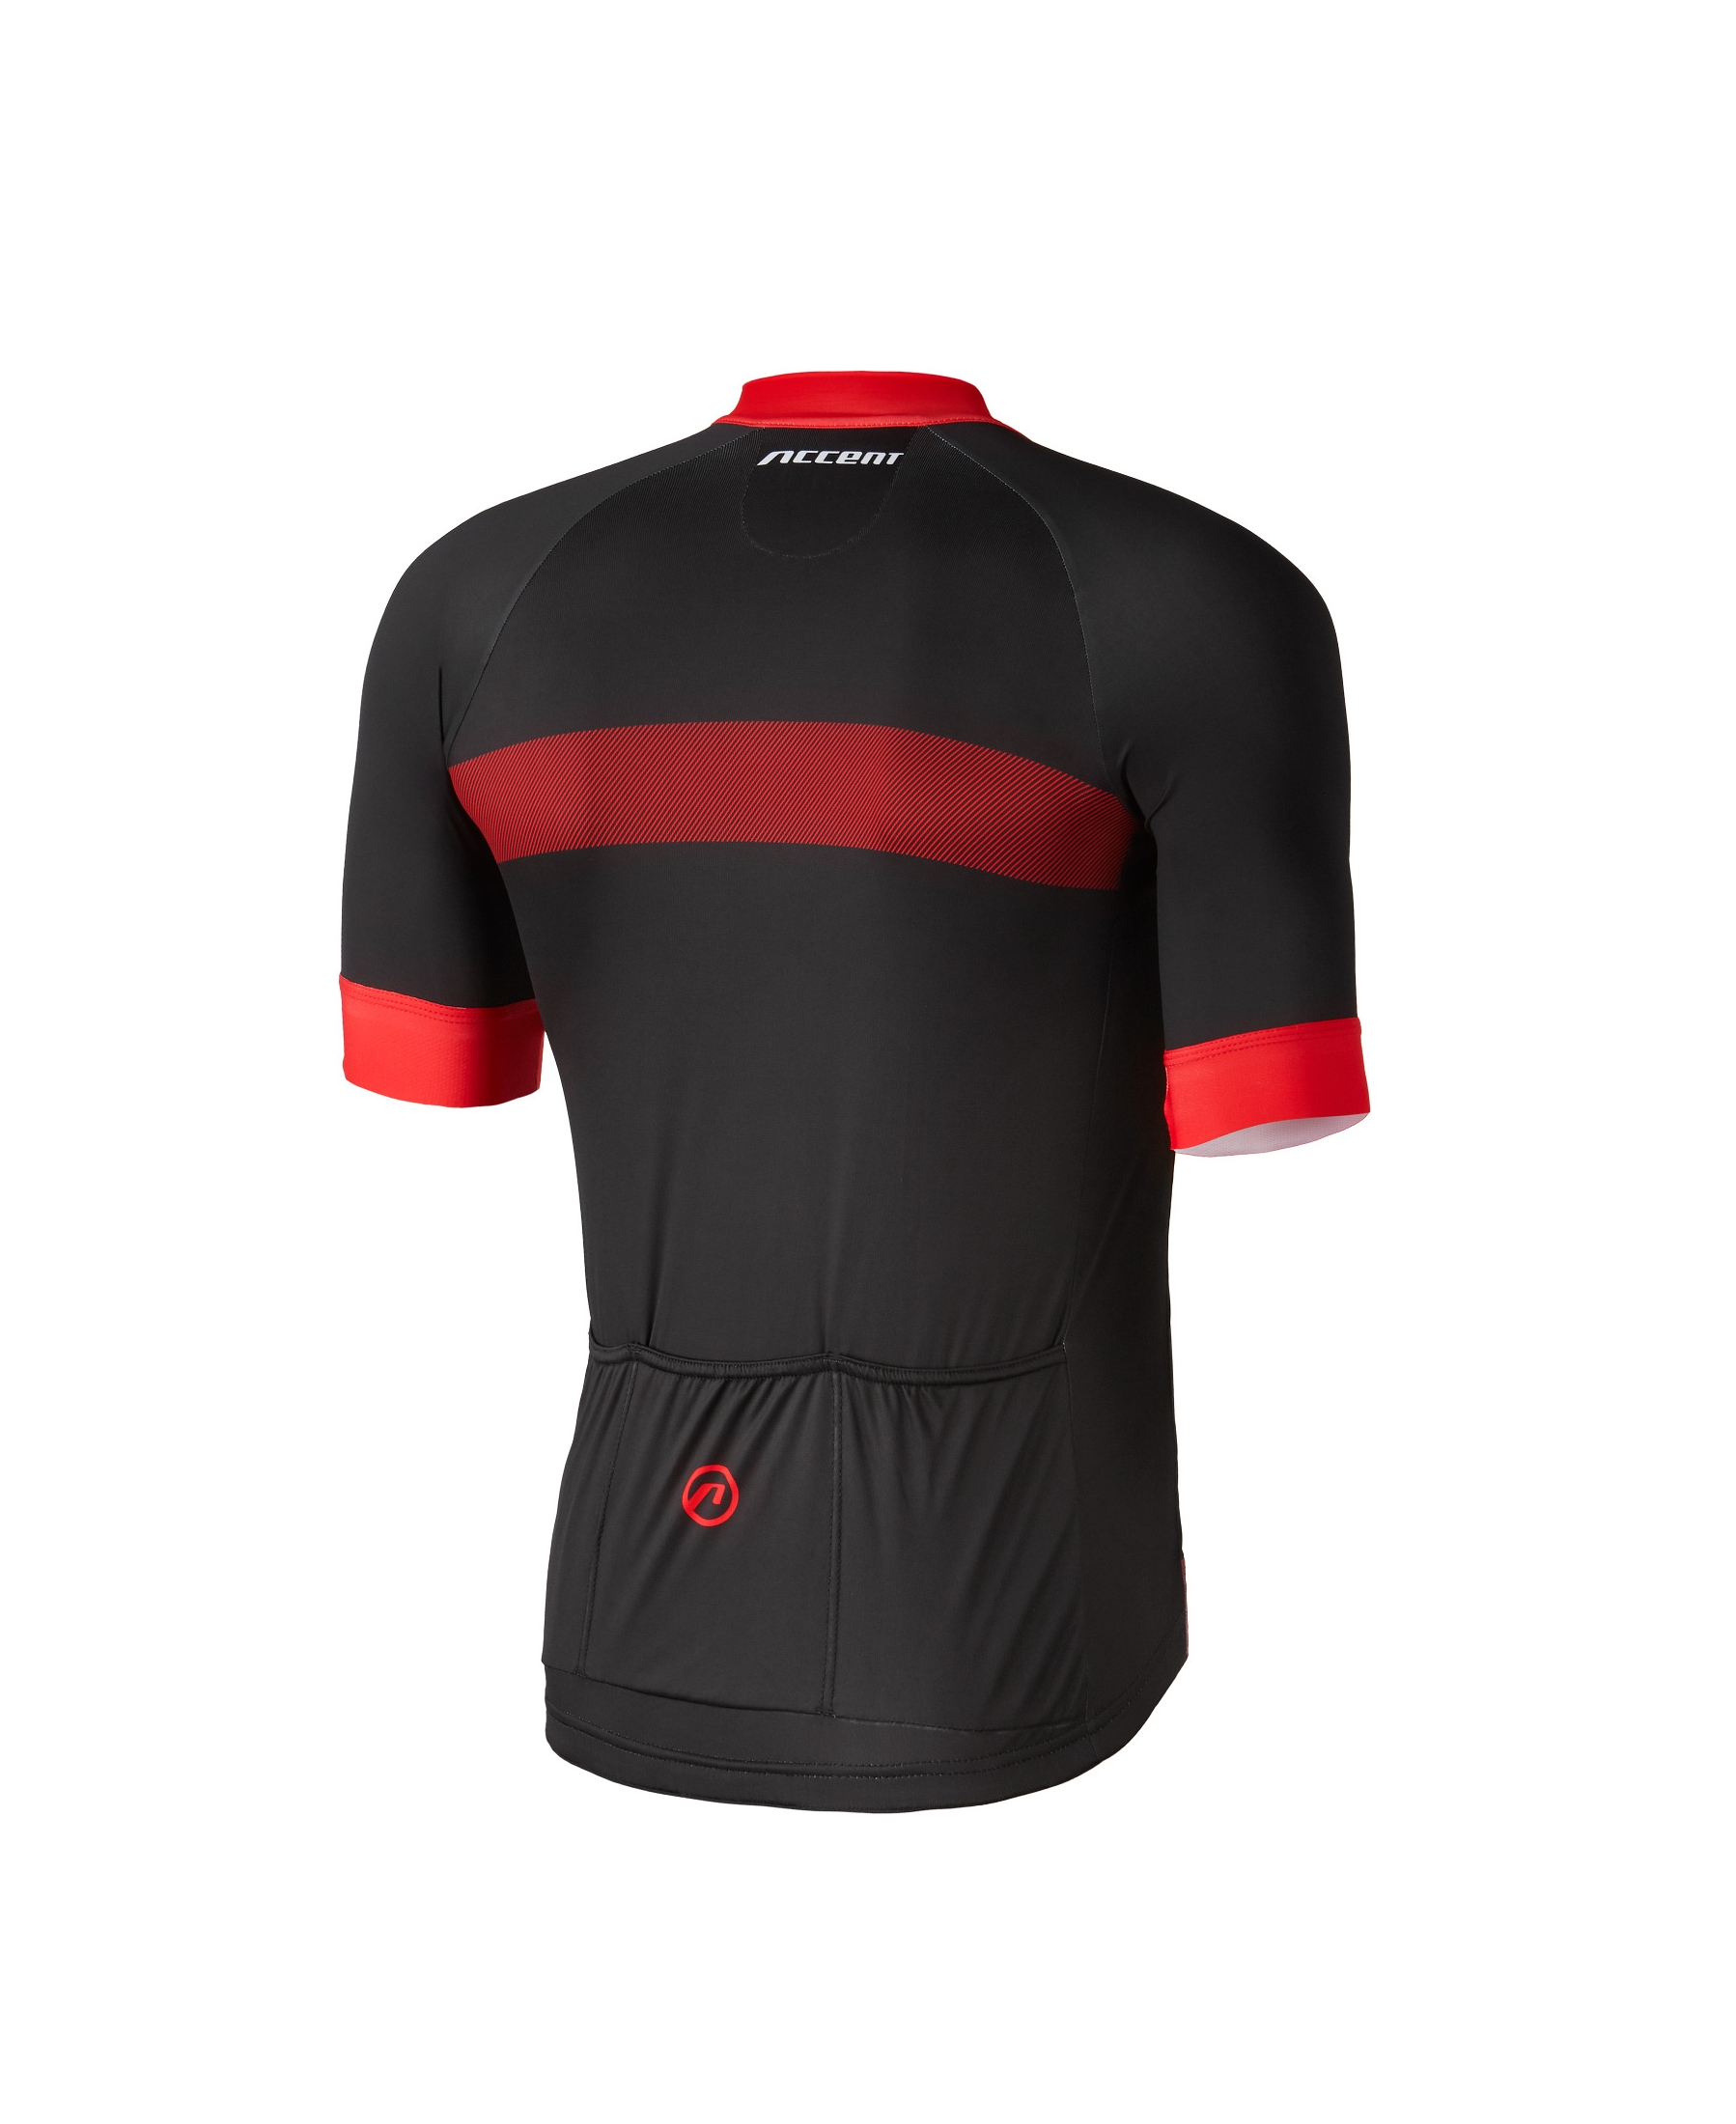 accent_clothing_jersey_shortsleeve_Vector_black_red_rear